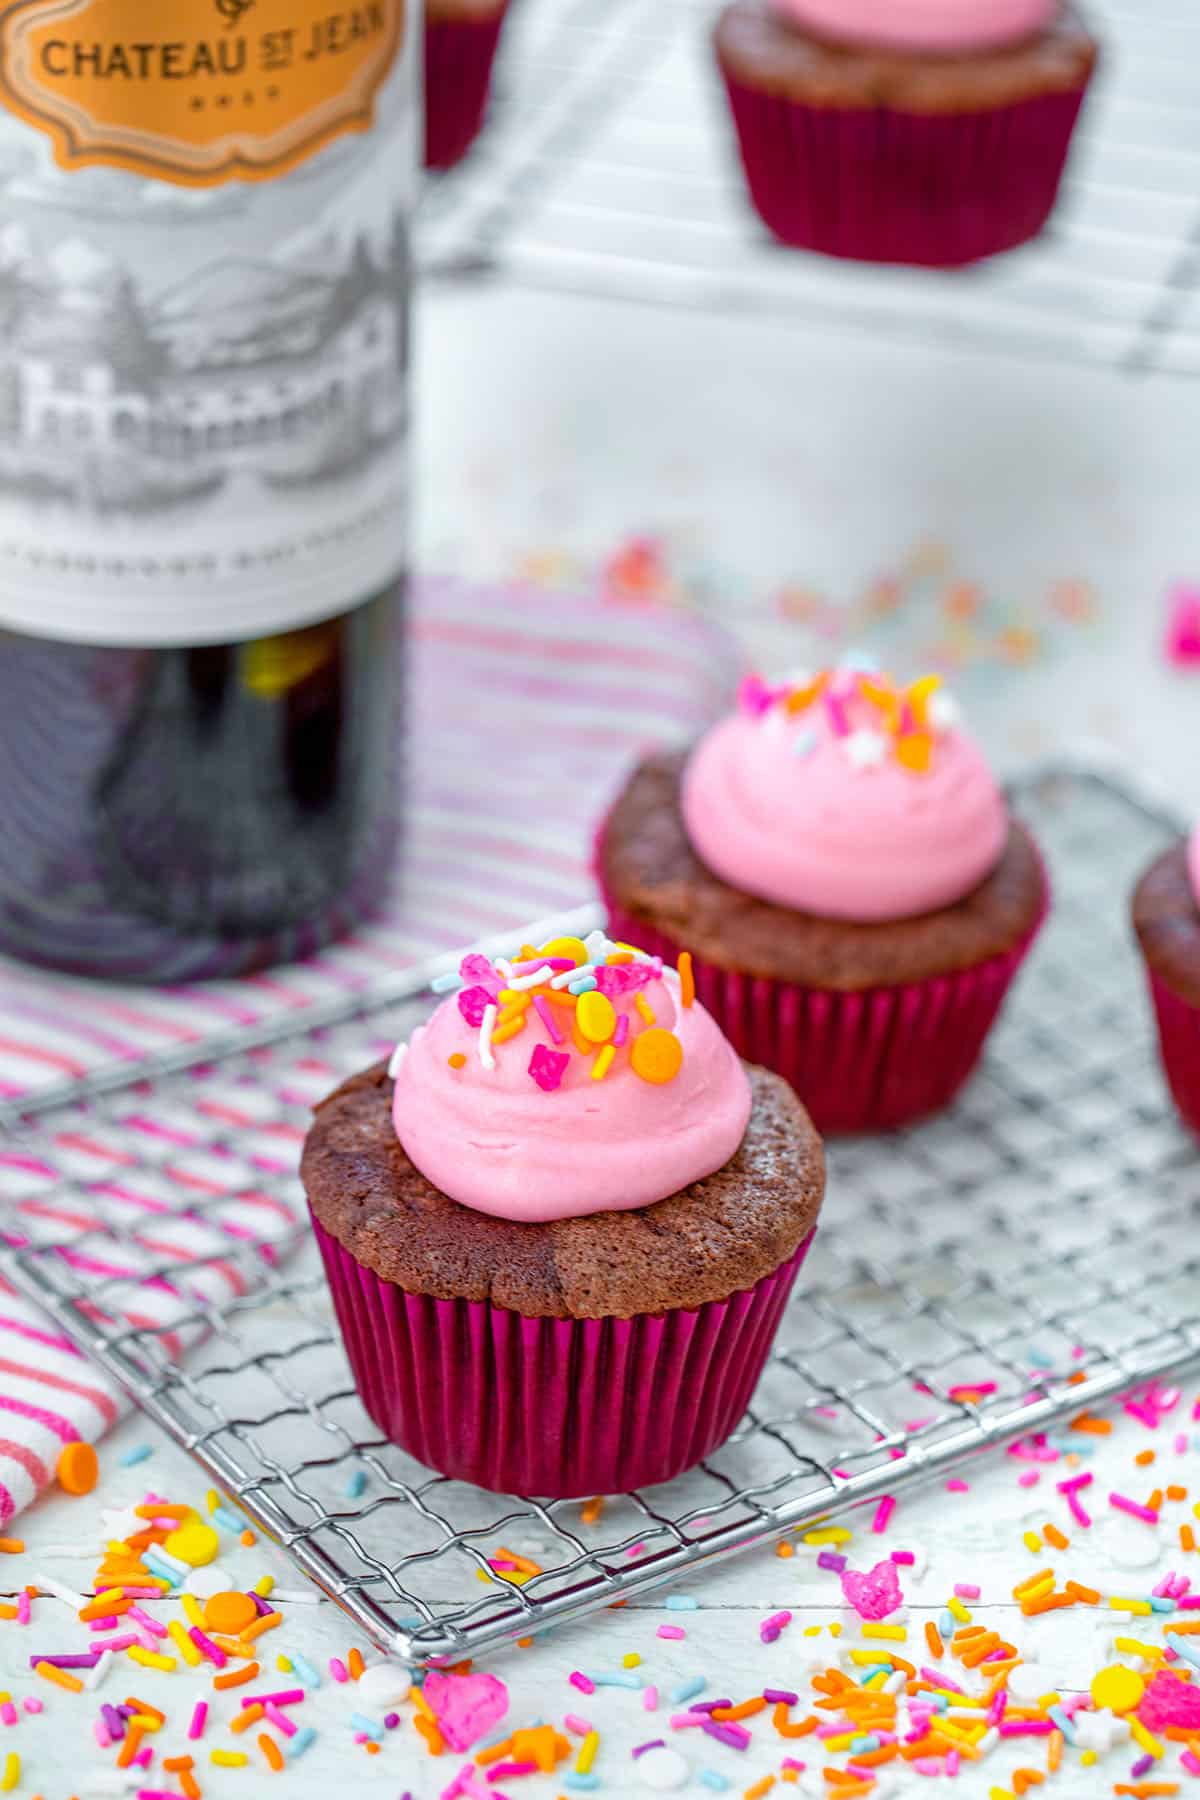 Head-on view from a distance of red wine cupcakes on a cooling rack with pink frosting and sprinkles with bottle of wine, more cupcakes, and sprinkles in background.